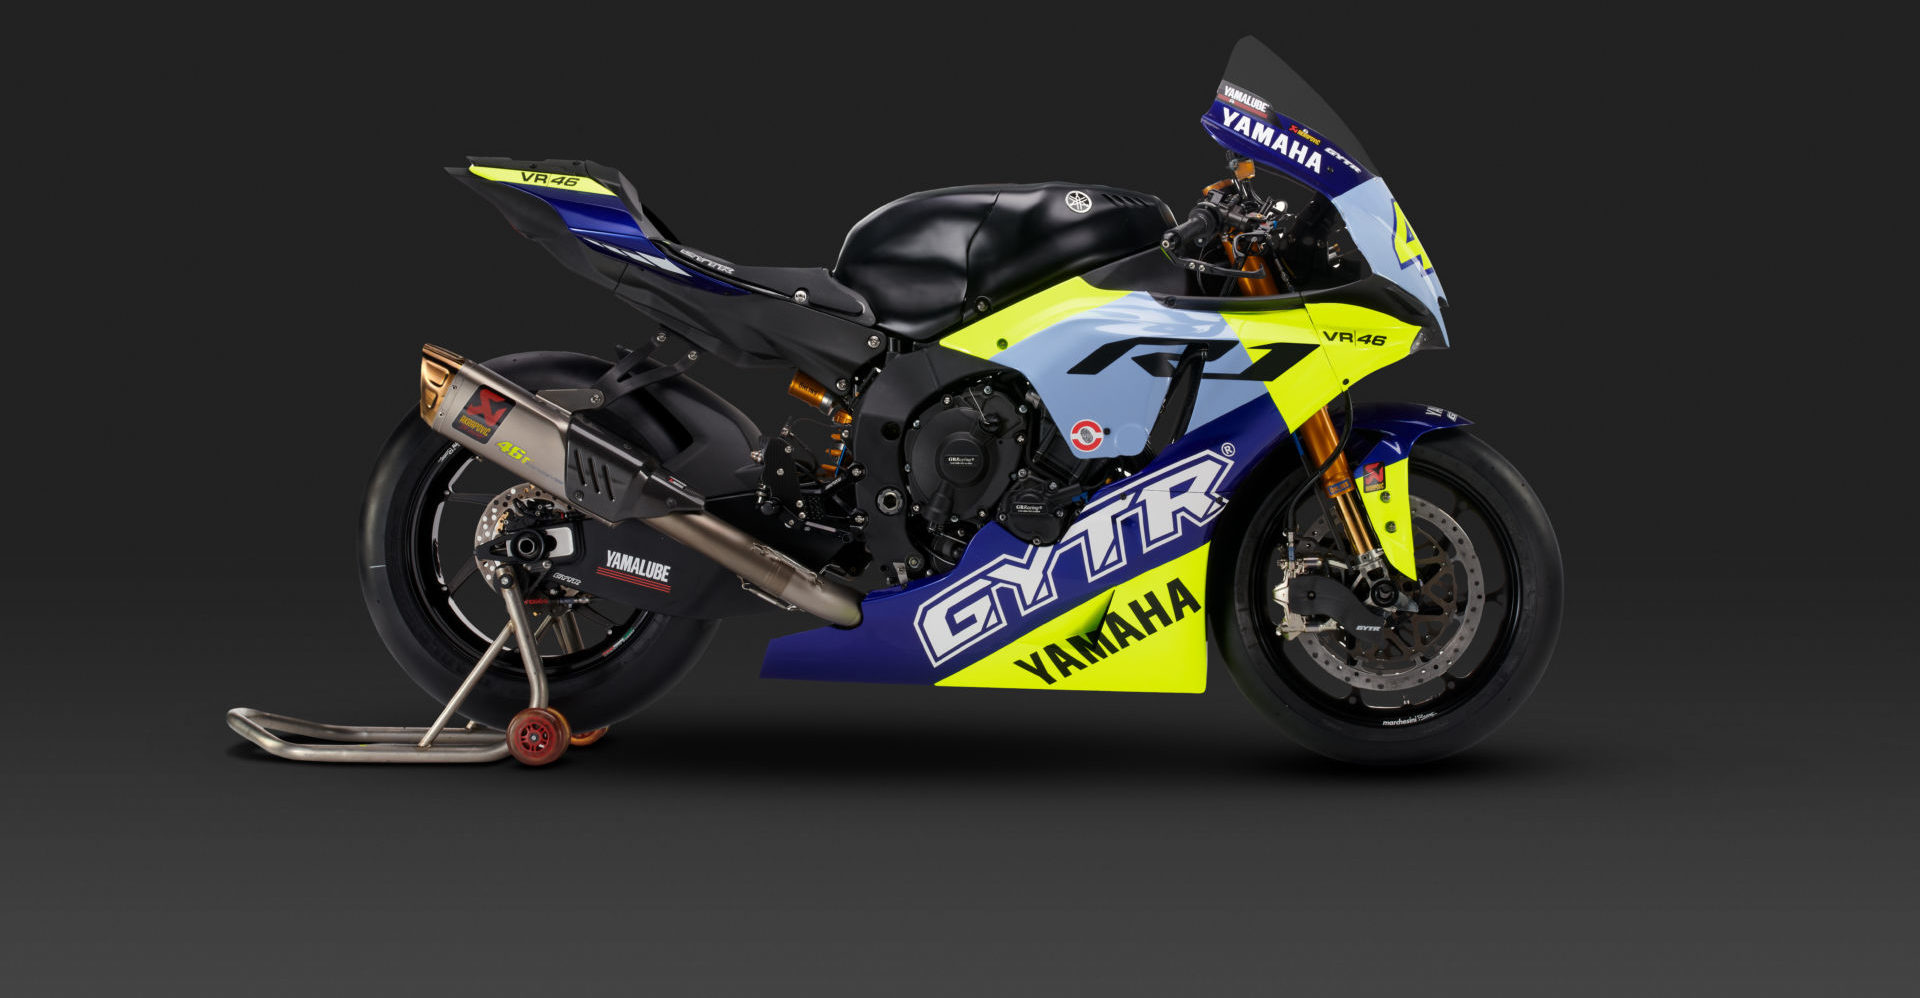 The R1 GYTR VR46 Tribute track day motorcycle Yamaha created as a gift for Valentino Rossi. Photo courtesy Yamaha Motor Europe.